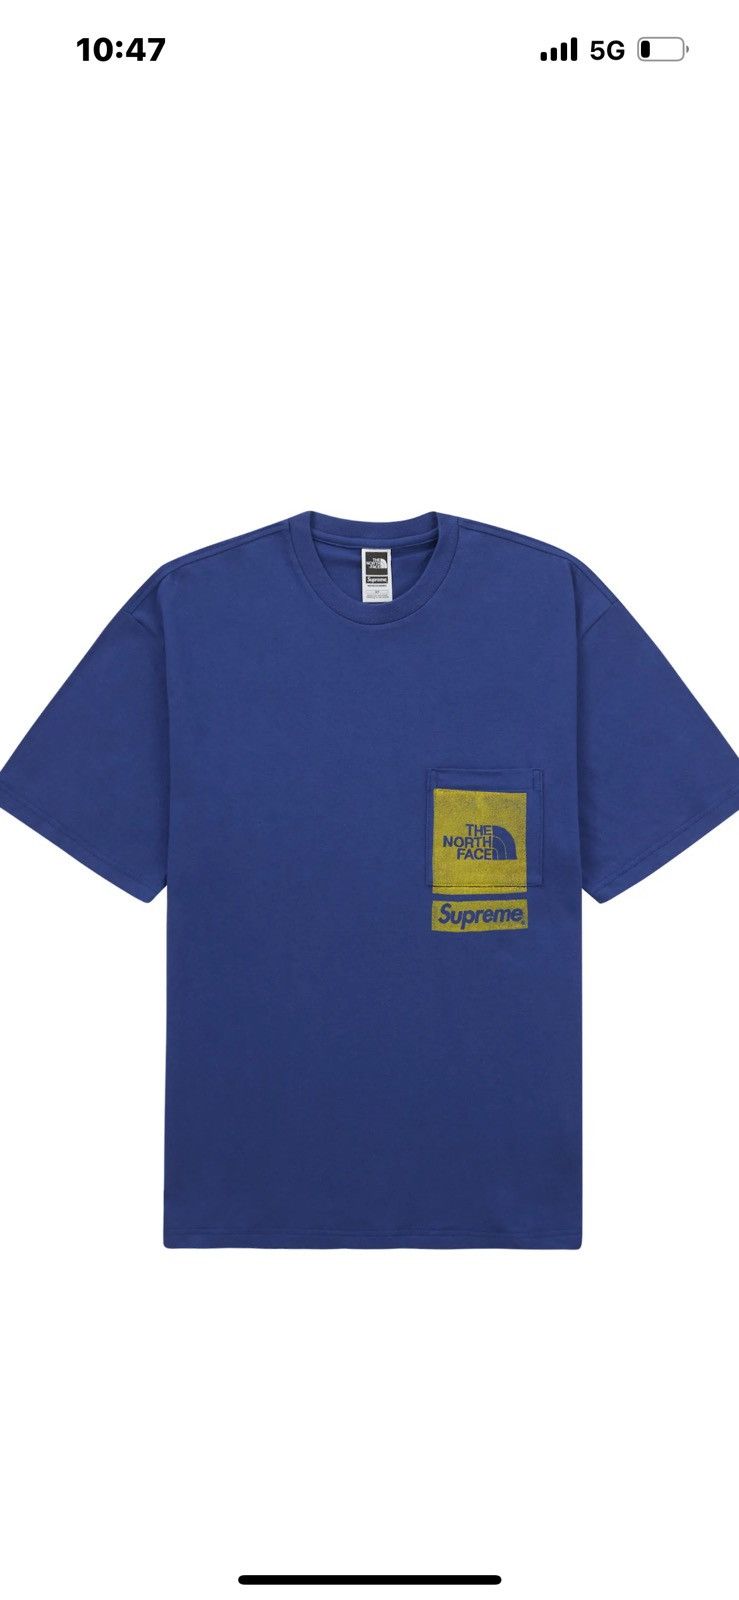 Supreme Supreme x The North Face printed Pocket Tee Navy | Grailed